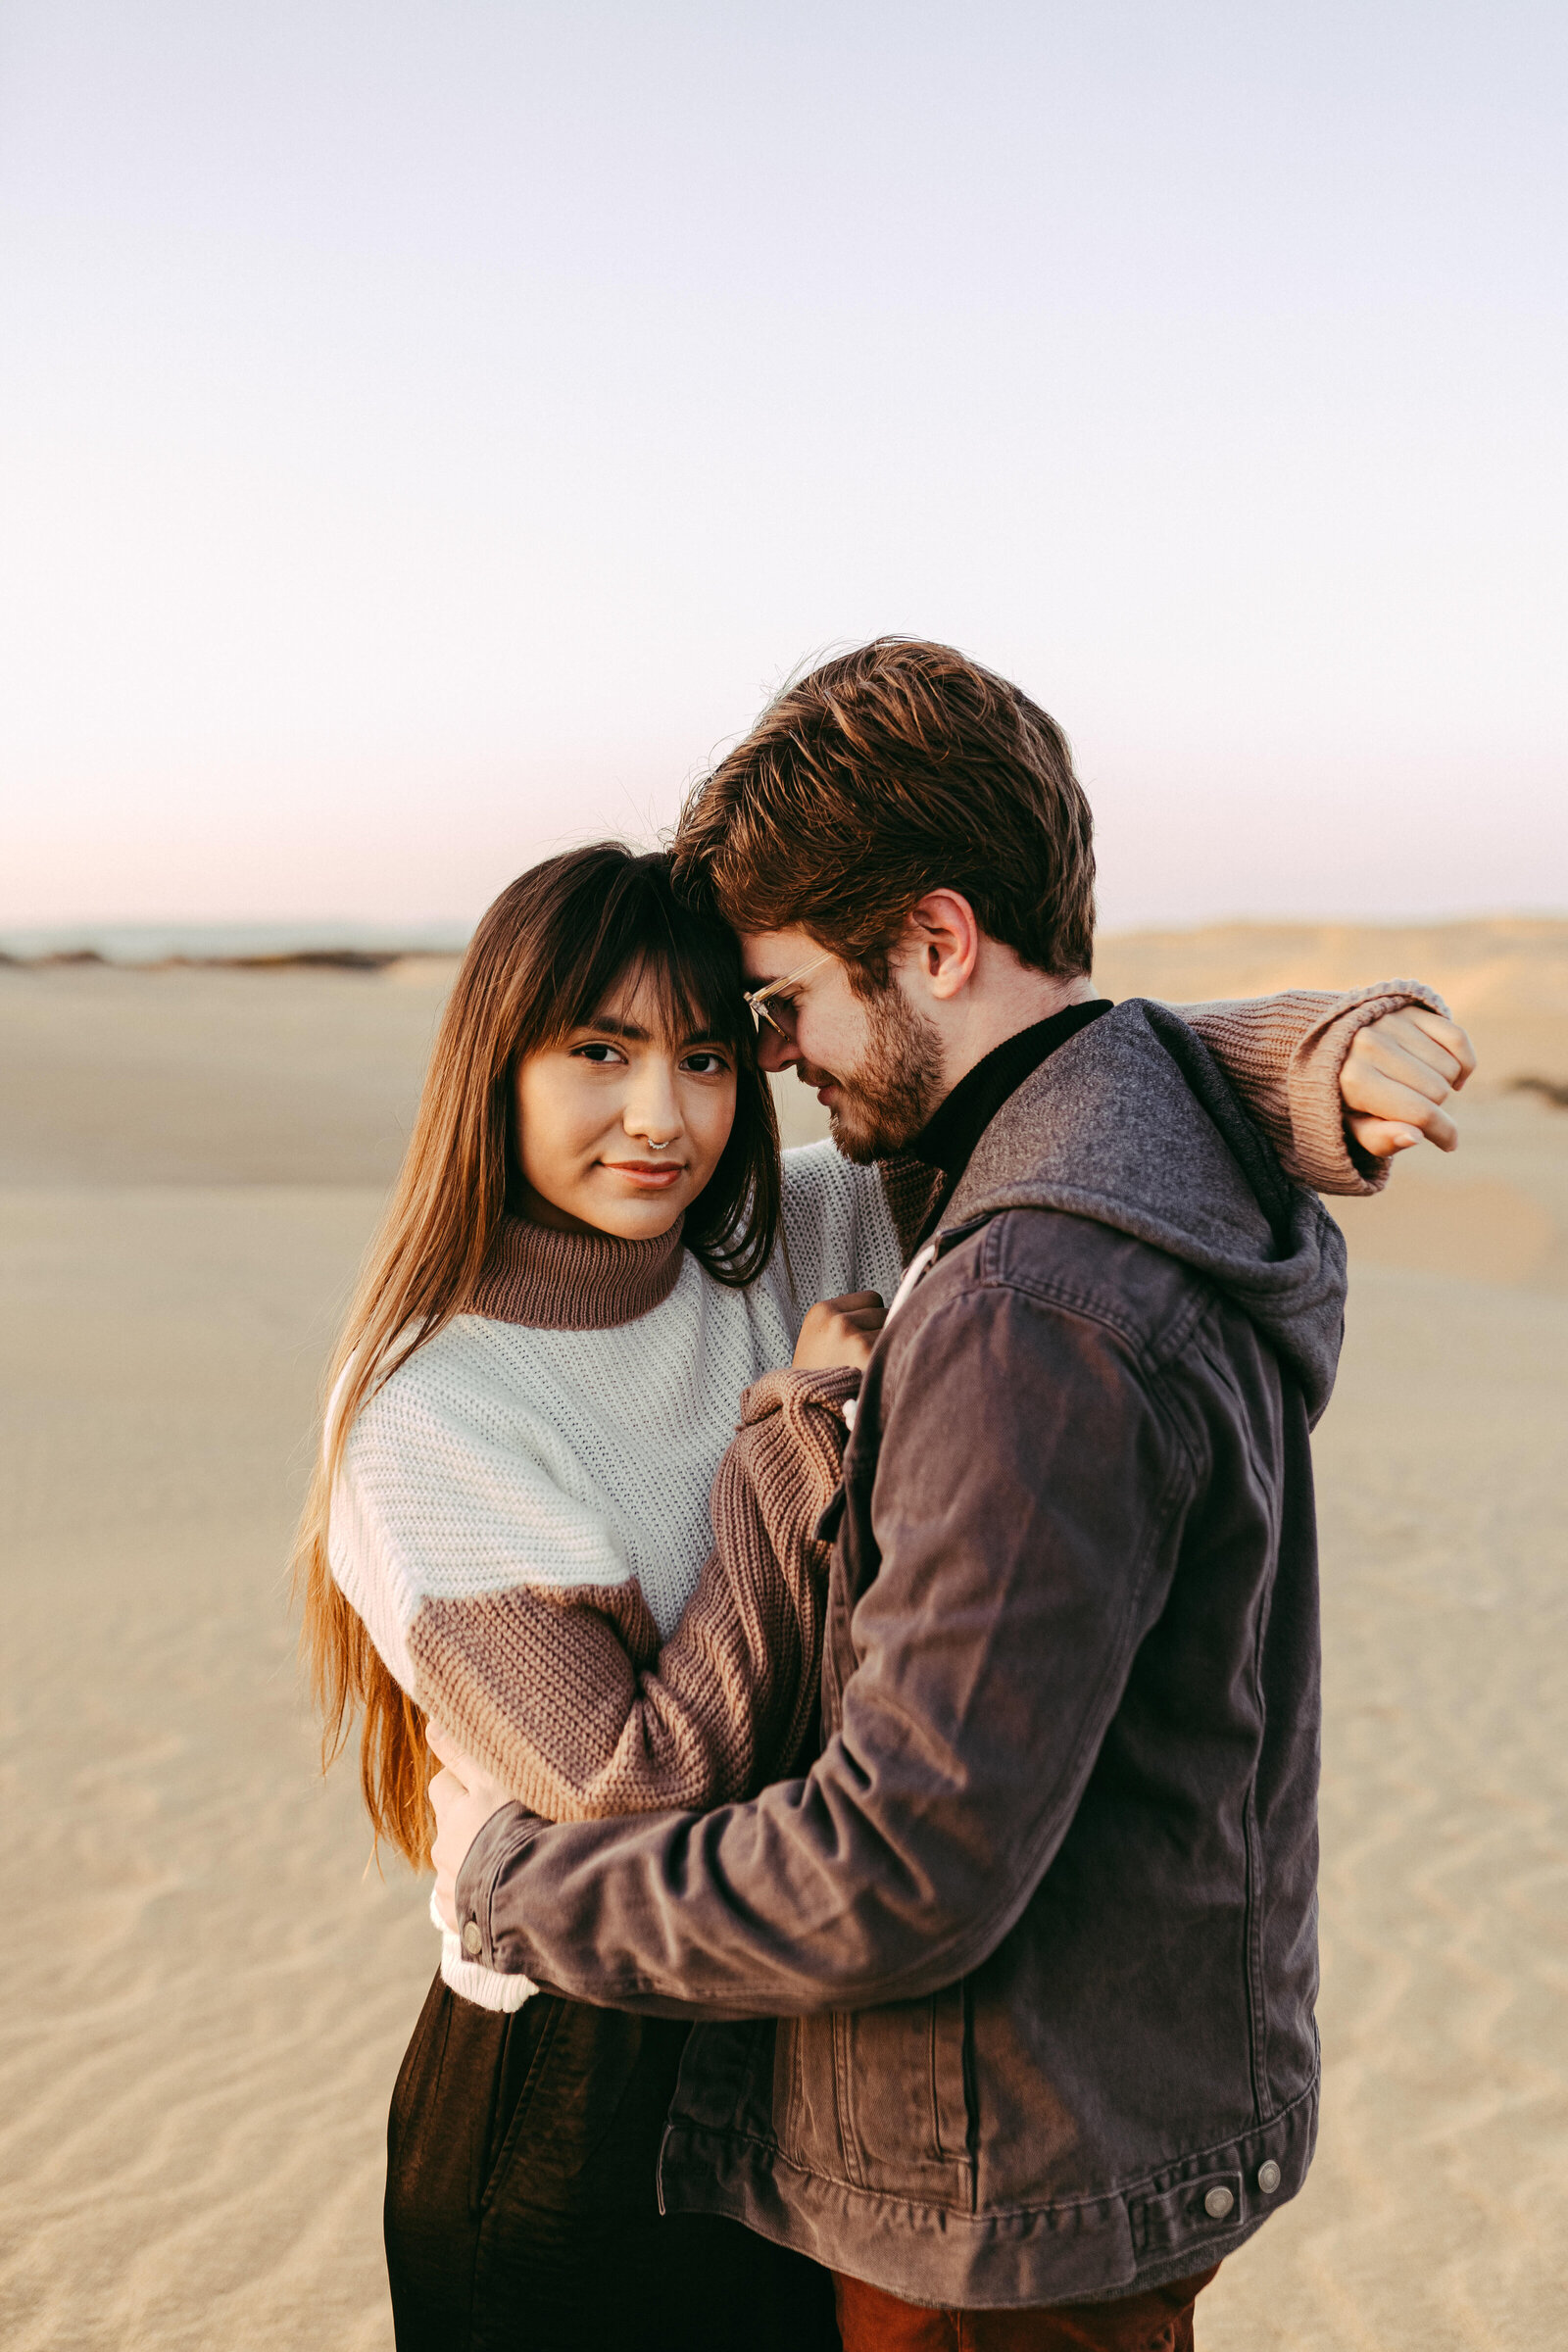 Sand Dunes Pismo Beach Couples Photos -- Travis and Crystal6